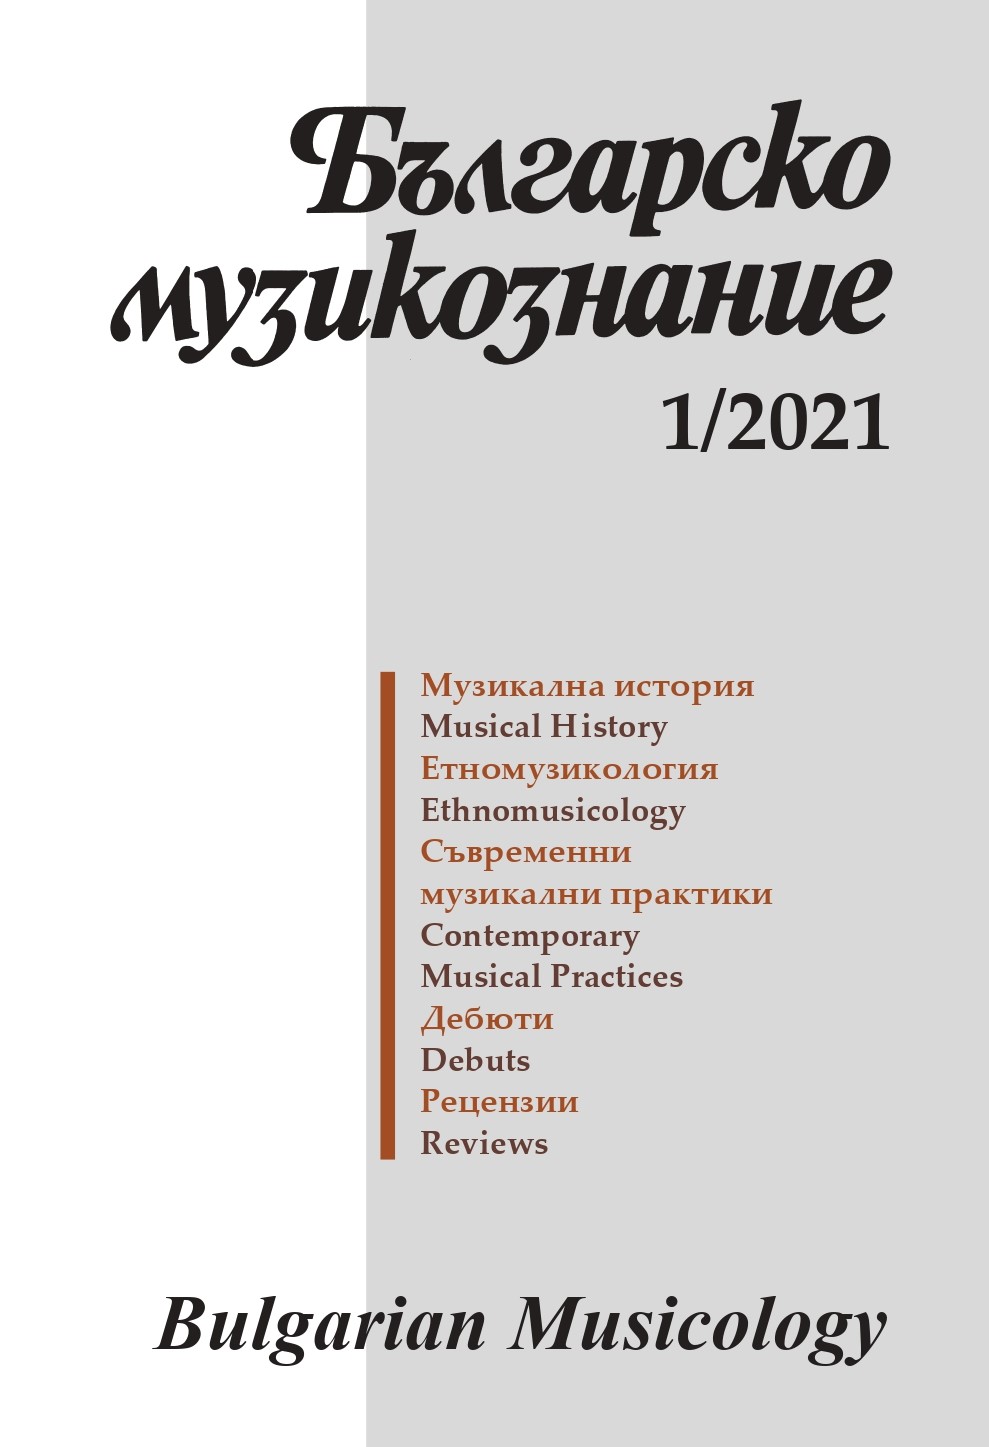 Processes of Development and Change in Bulgaria’s Southwest Folk Music Cover Image